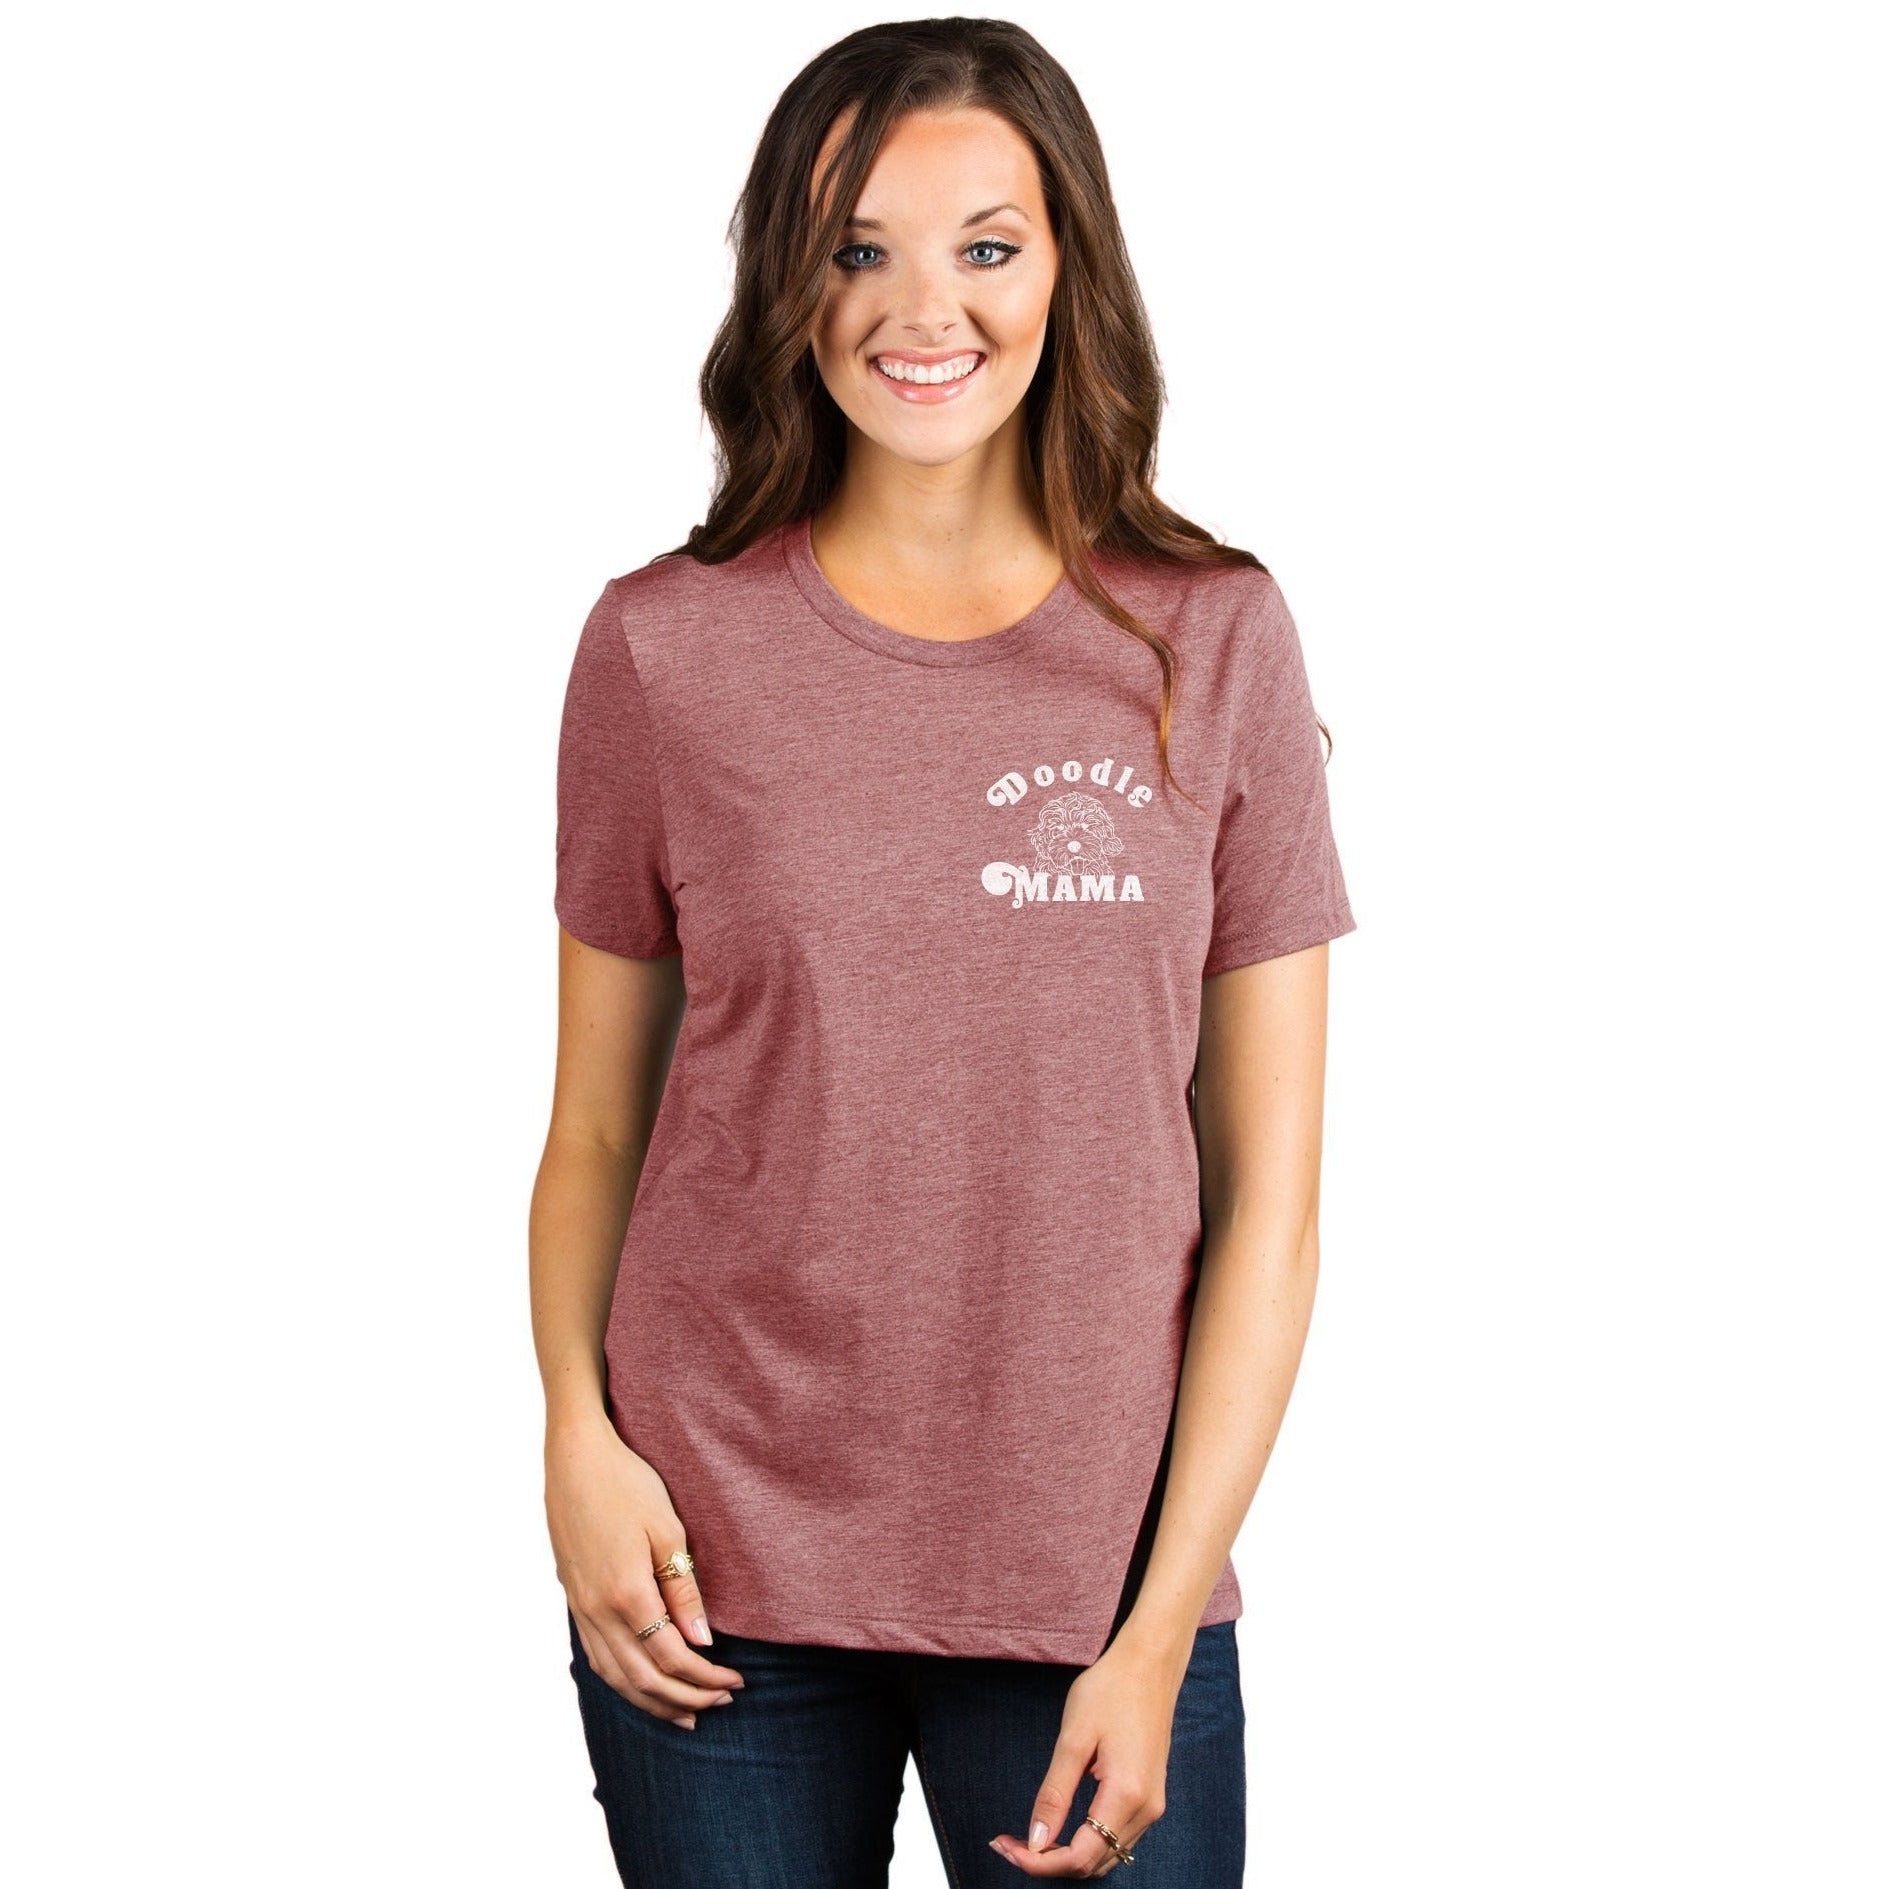 Doodle Mama Women's Relaxed Crewneck T-Shirt Top Tee Heather Rouge Model
